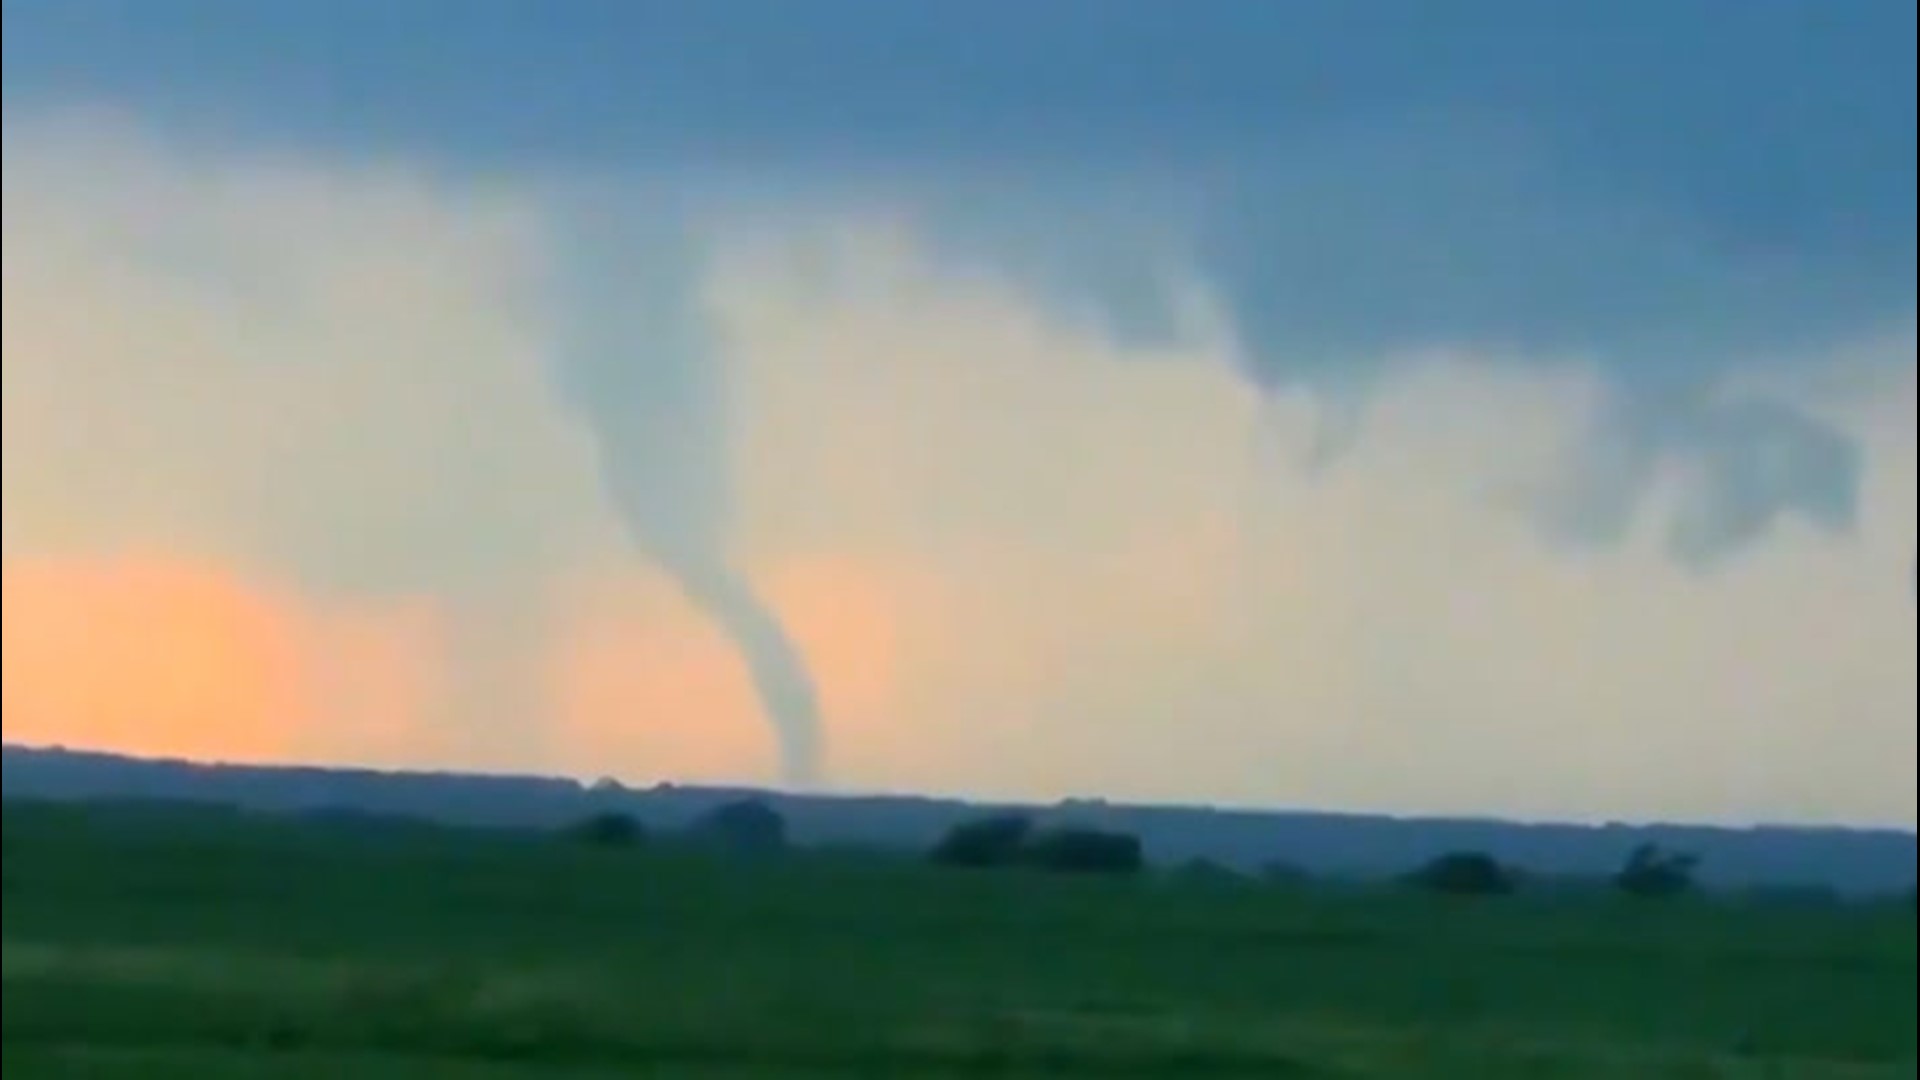 A tornado touched down in Blum, Texas, on Monday, May 3. You can hear the powerful winds in this footage, and see the trees bending from the force of the tornado.